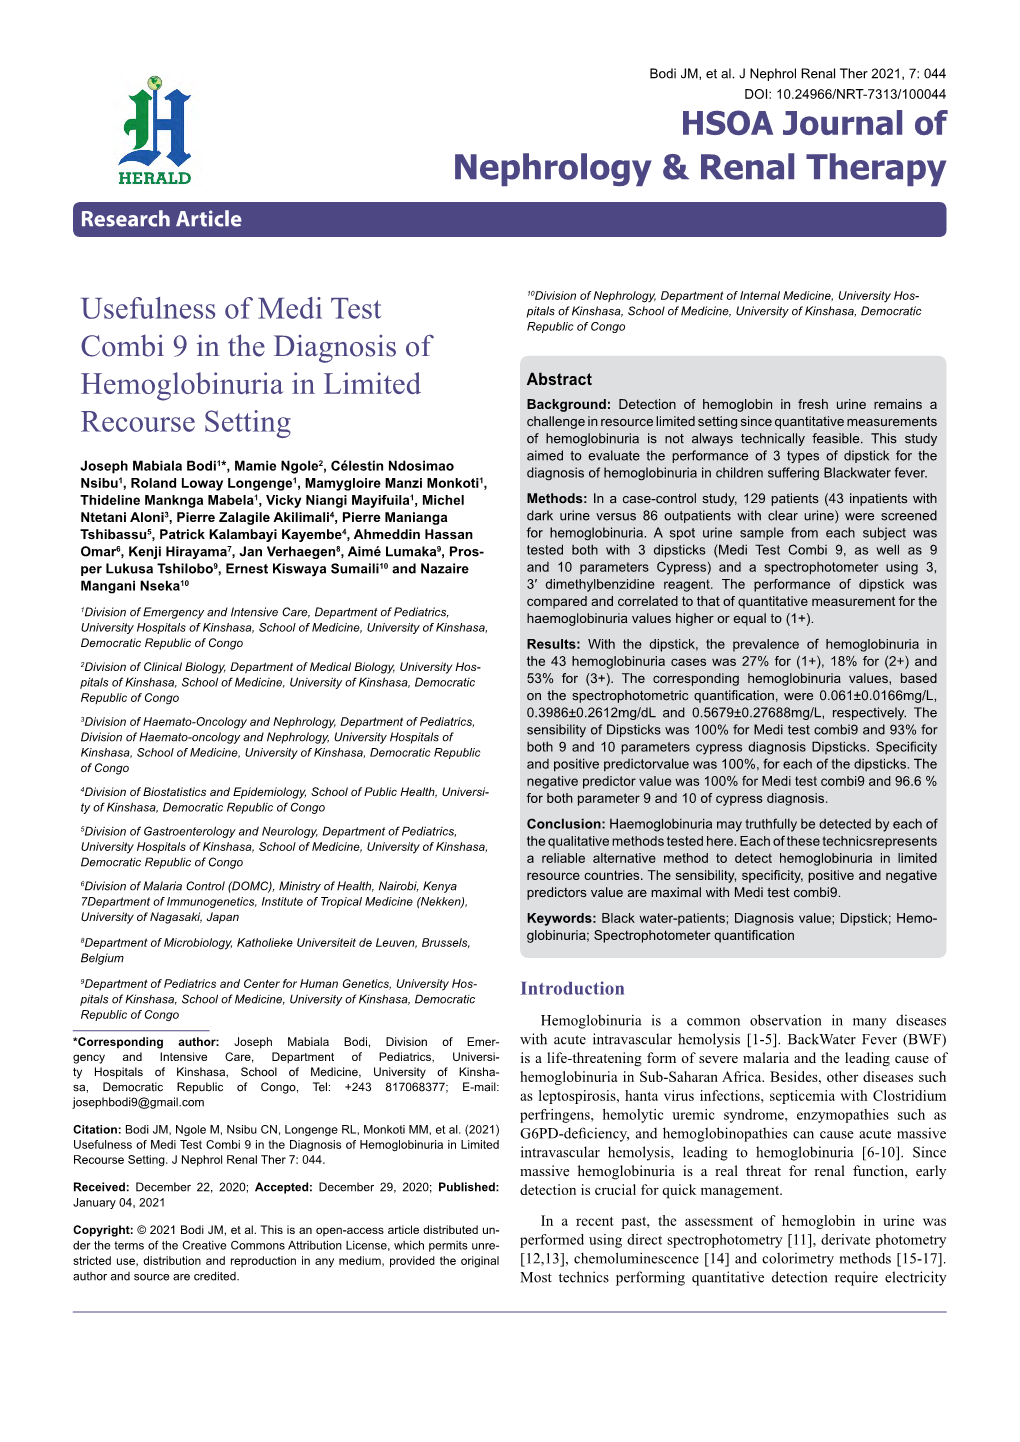 Usefulness of Medi Test Combi 9 in the Diagnosis of Hemoglobinuria in Limited Recourse Setting